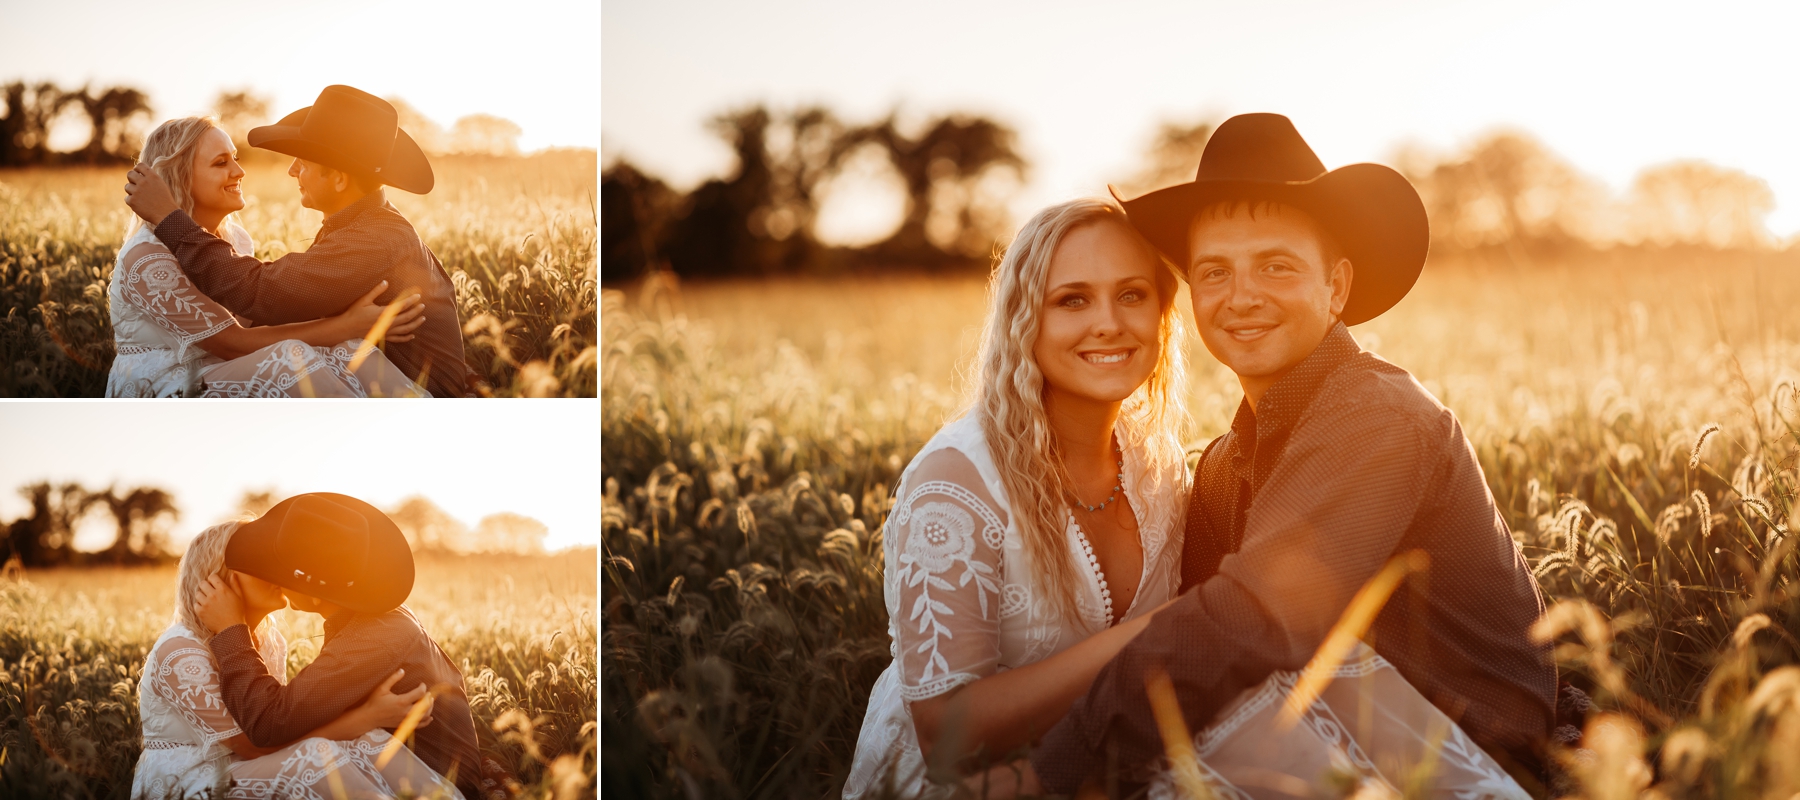 Hannah & Justin Engagement Session Outdoor Nature Country Brittany Jewell Photography golden hour vibes